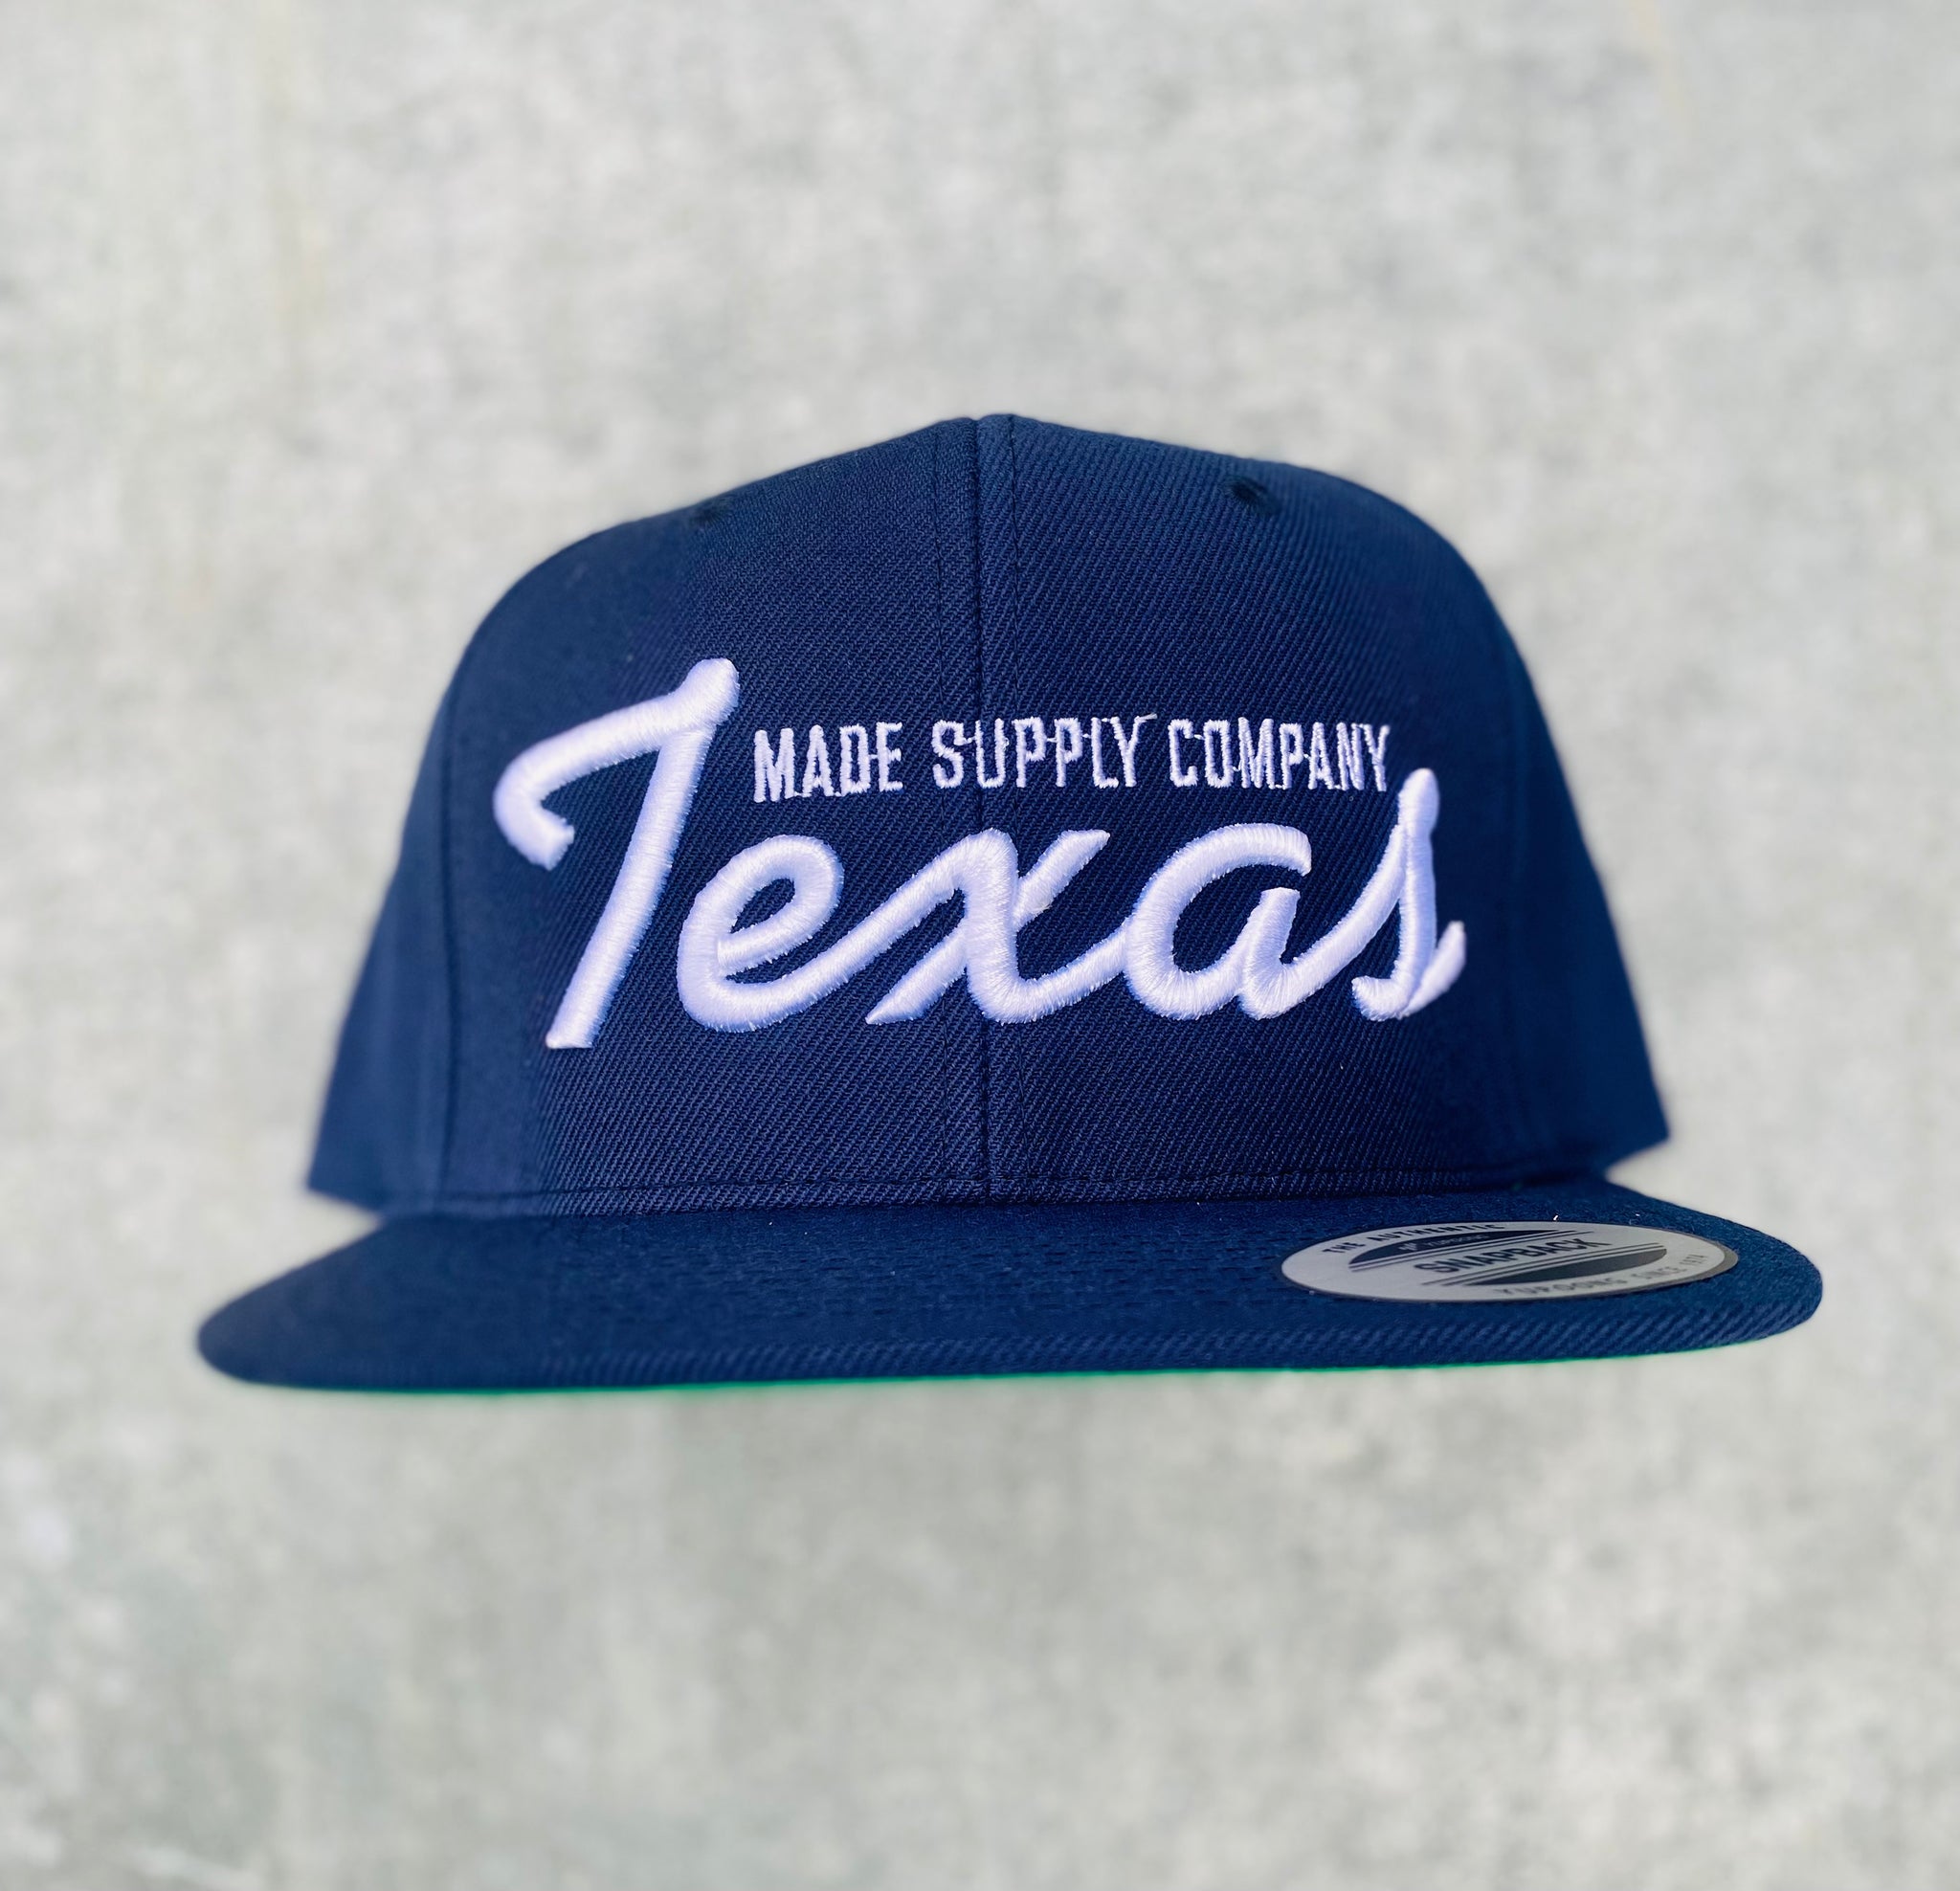 N.T.L. Official SnapBack Navy/White